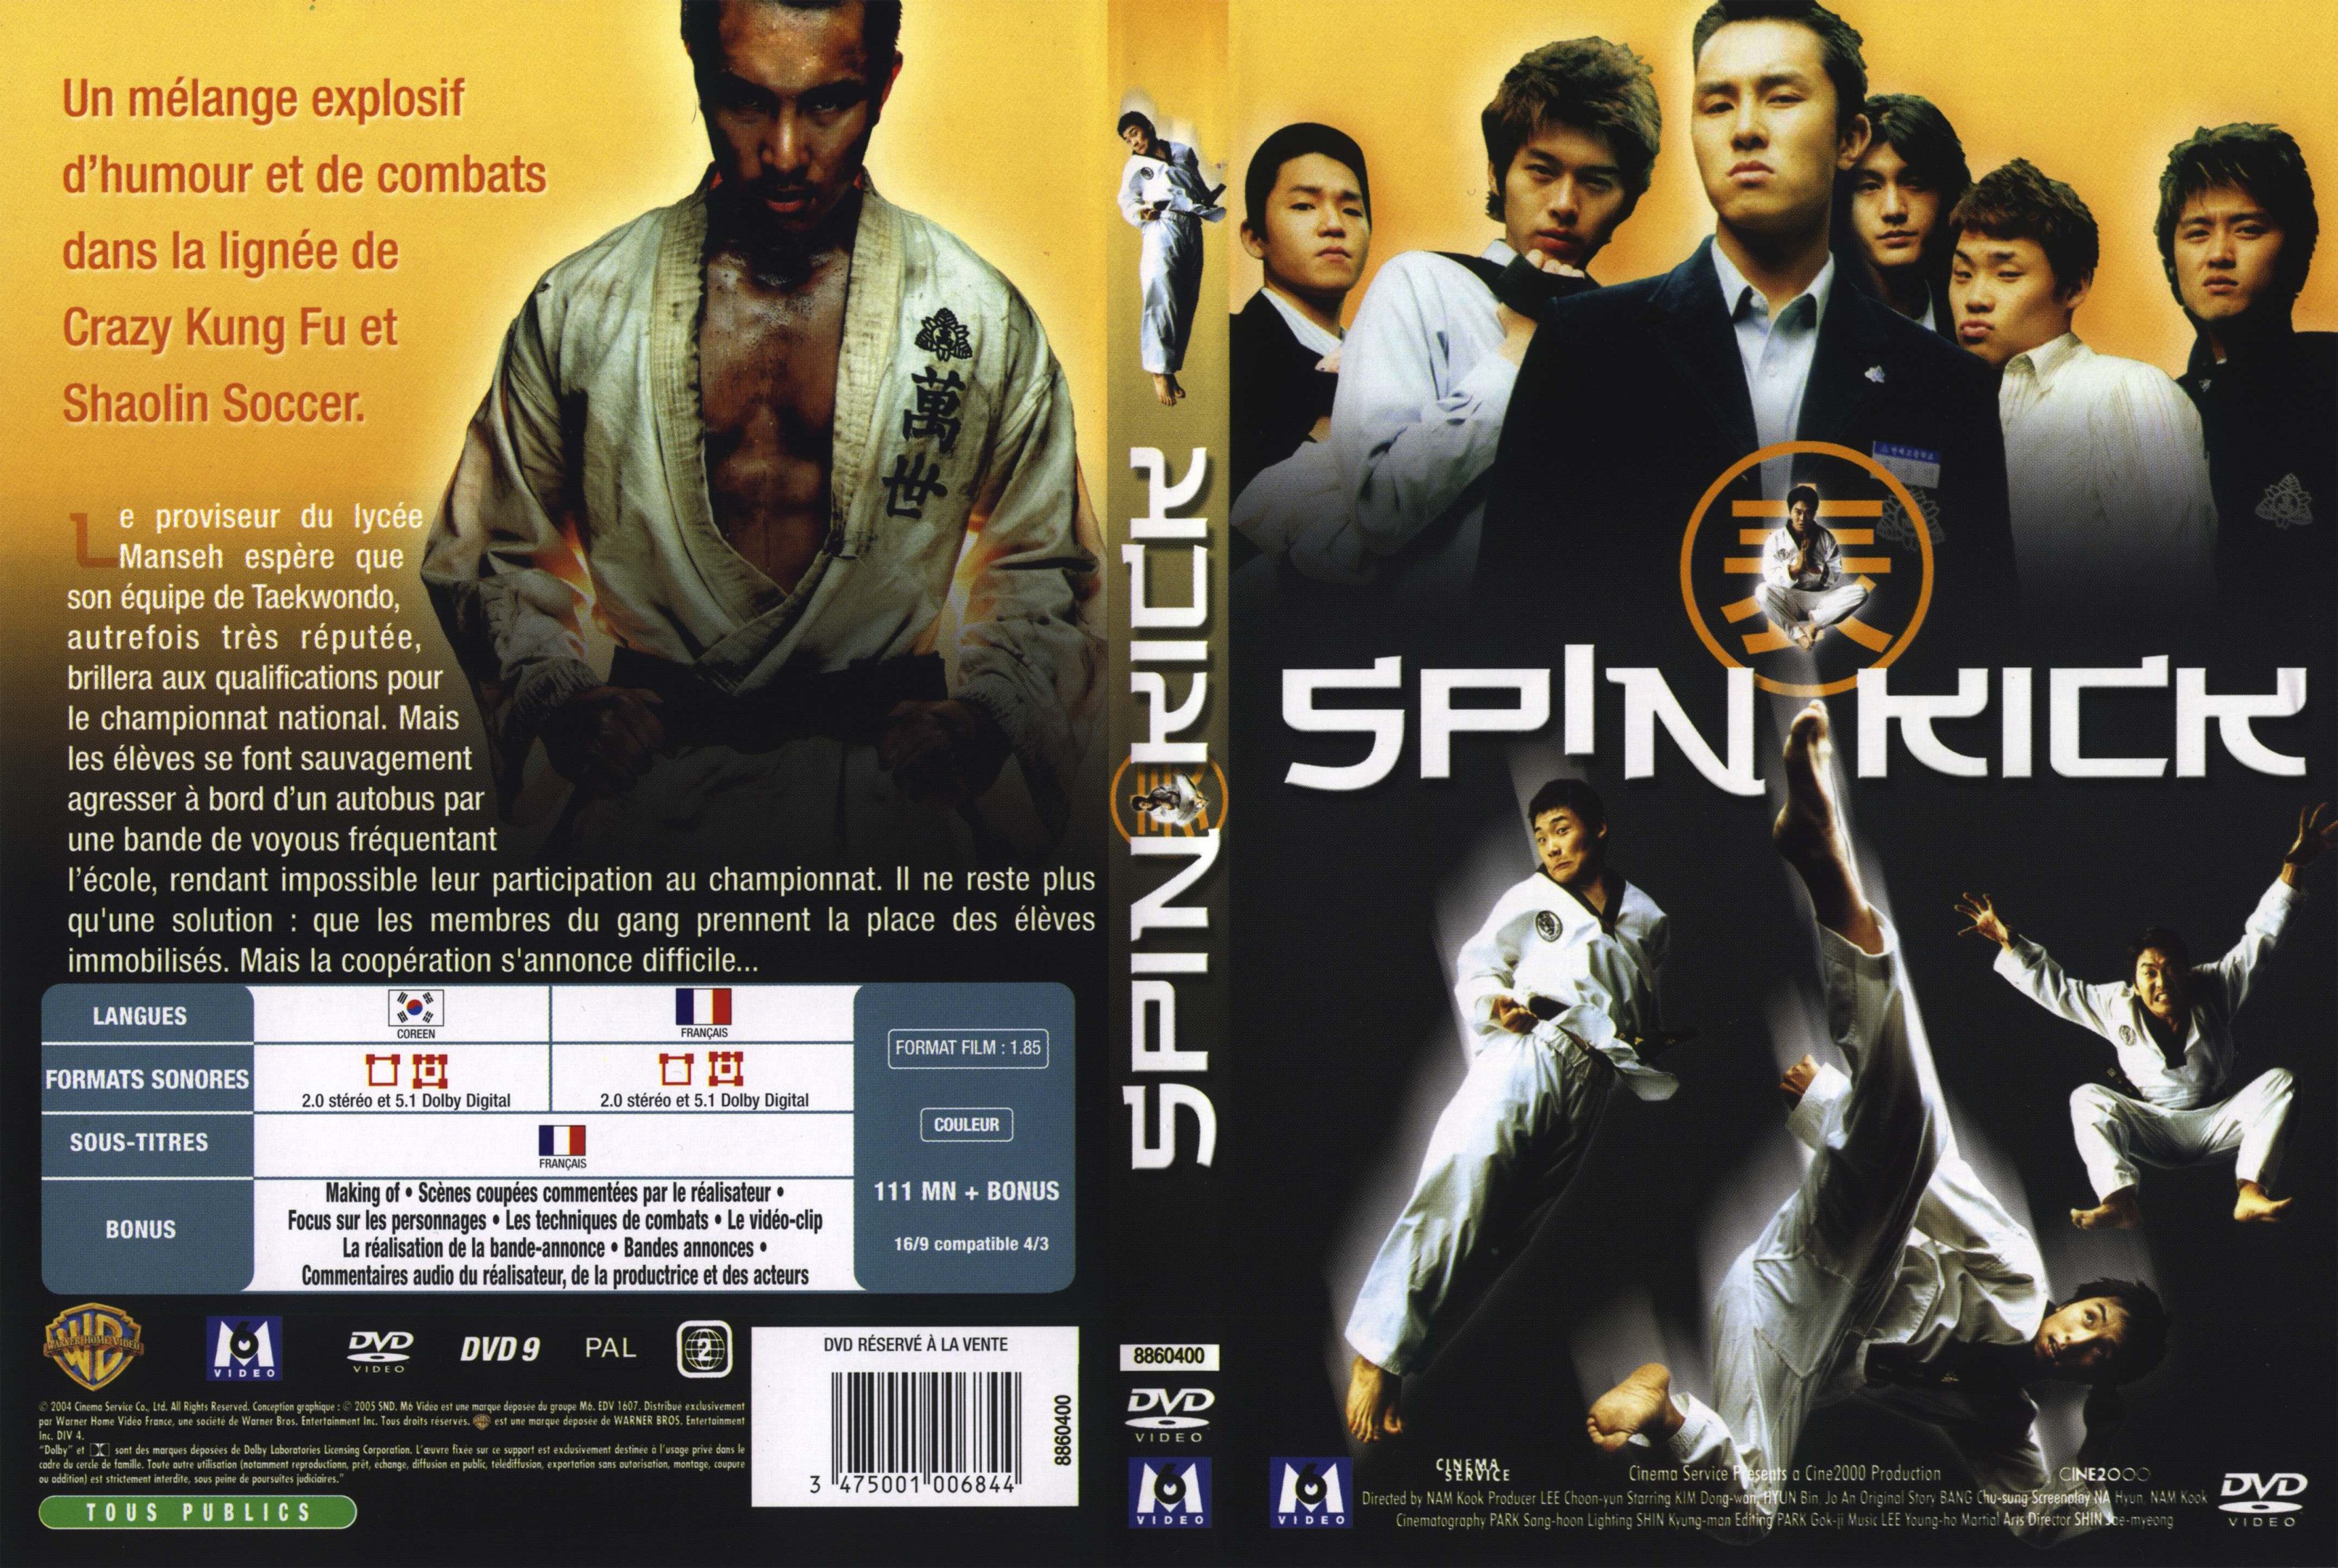 Jaquette DVD Spin Kick